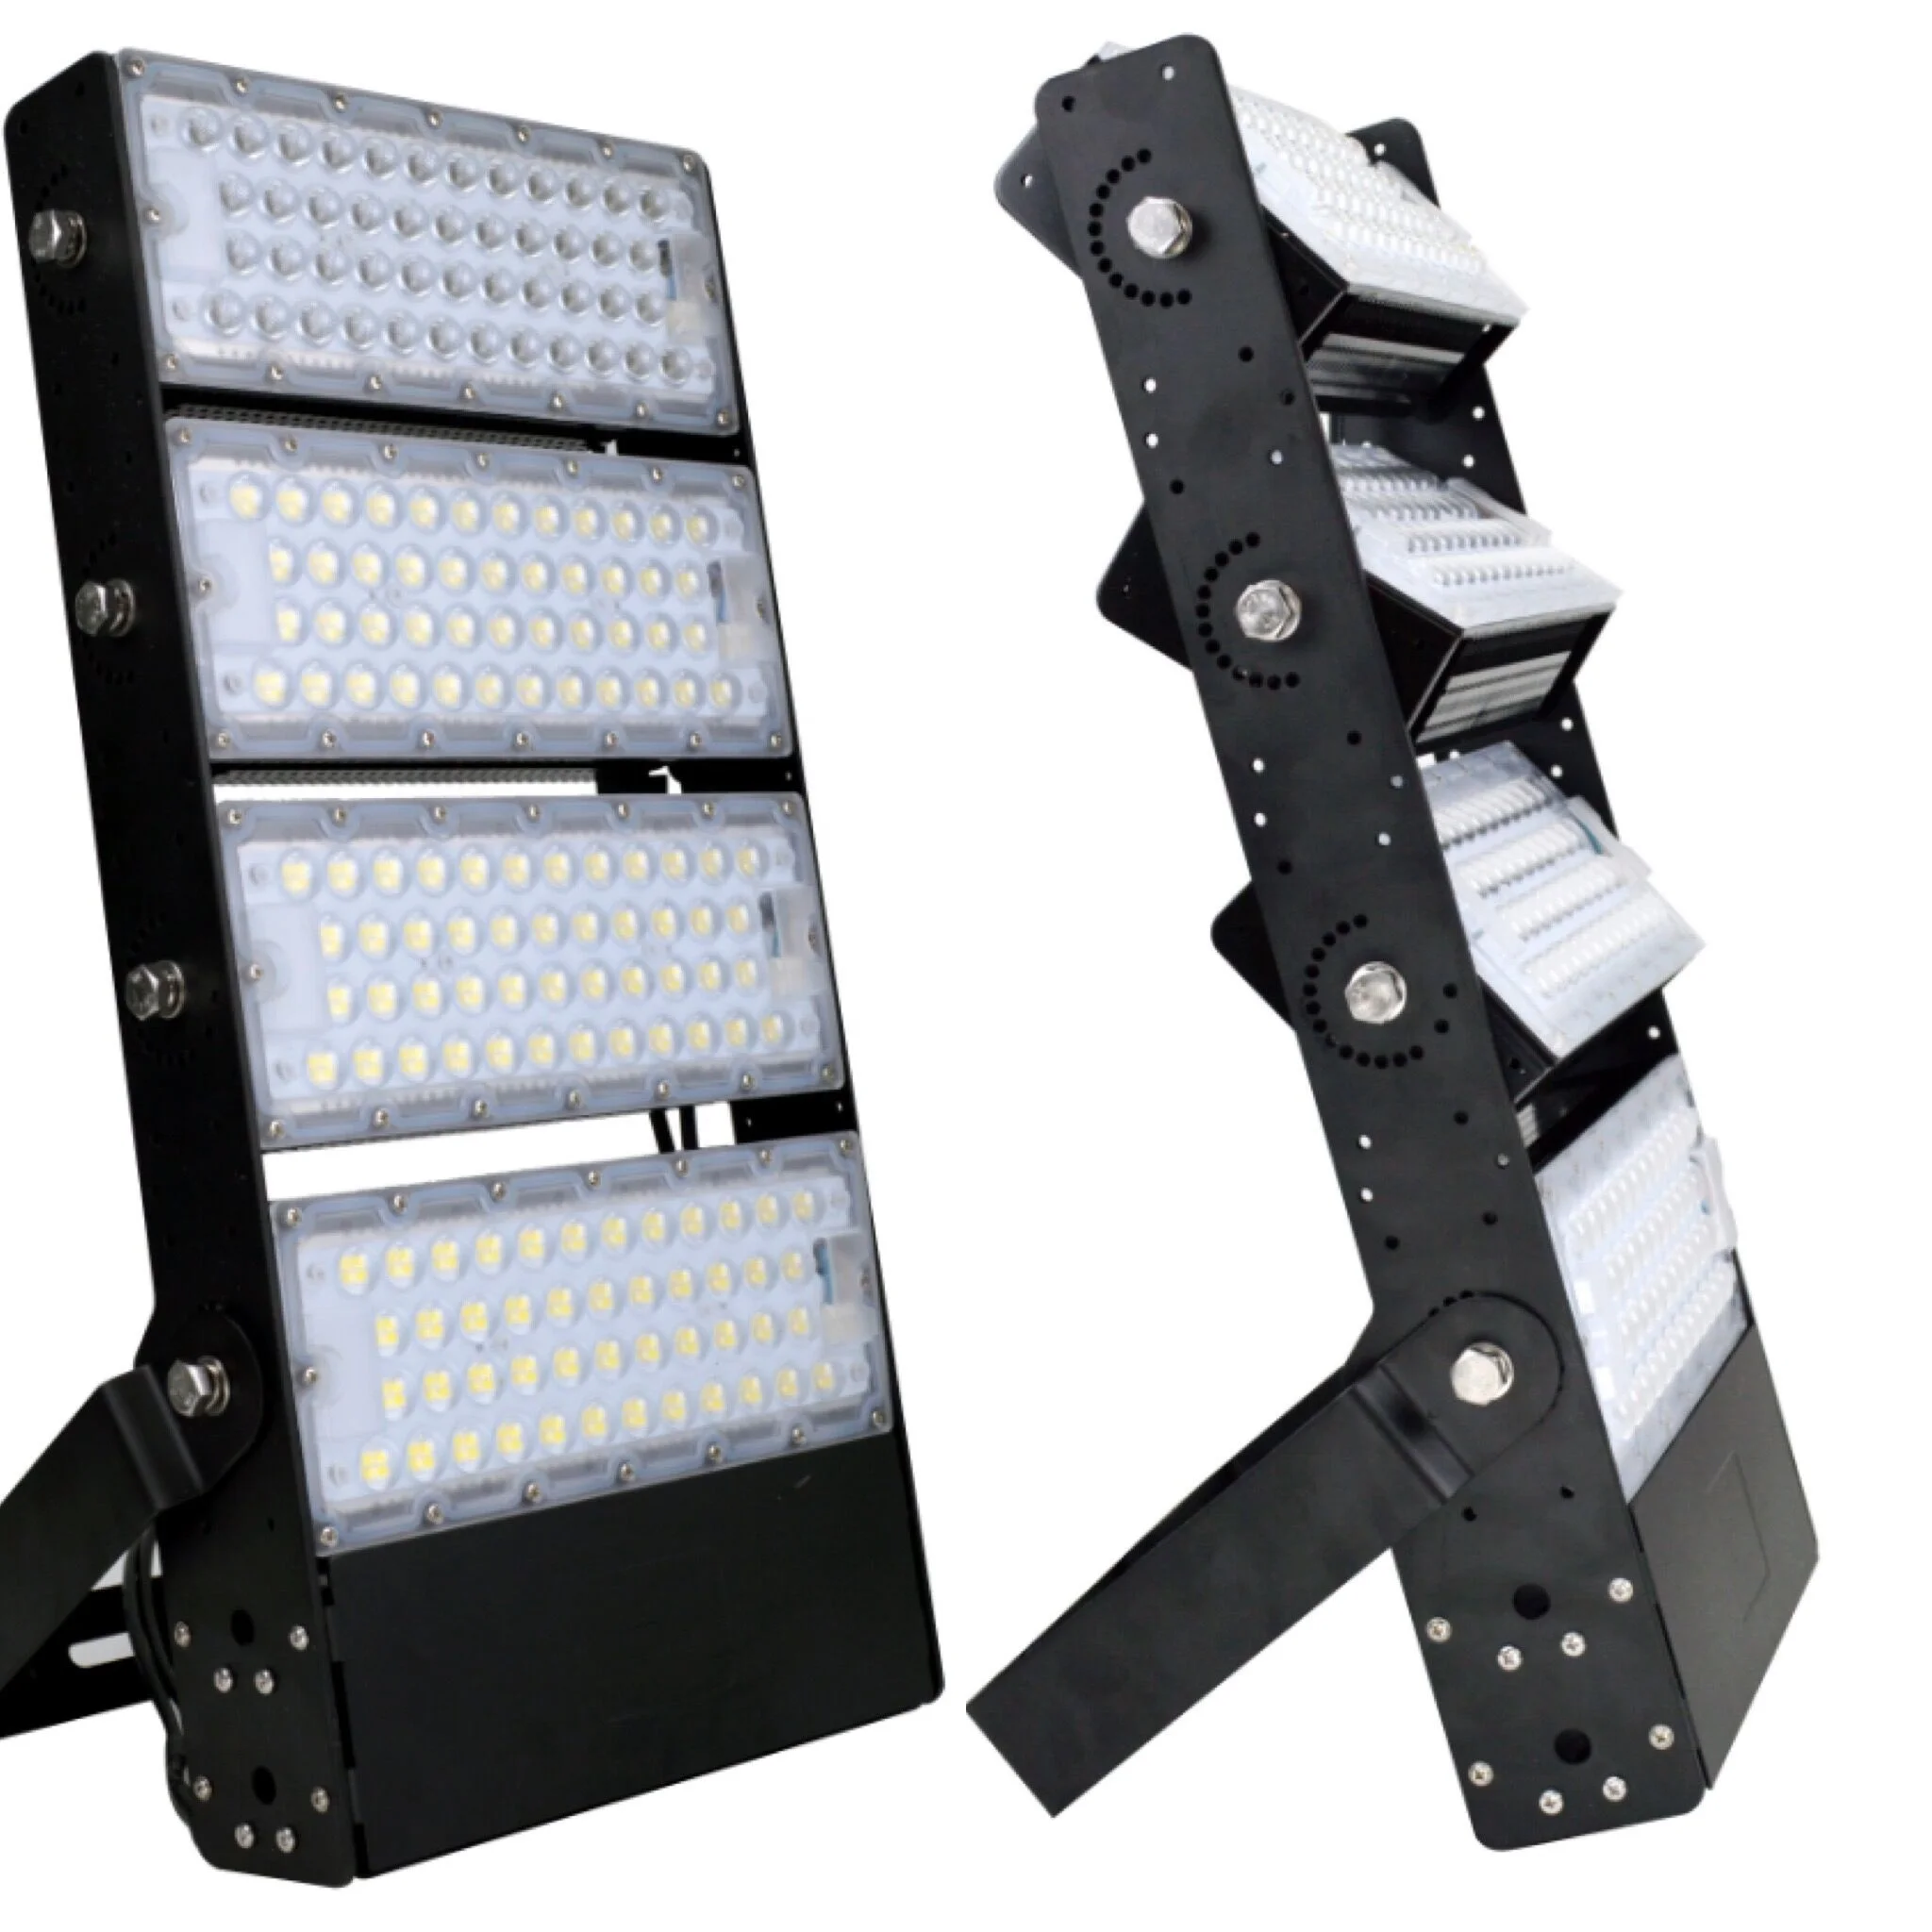 Shenzhen Factory Direct Price Rectangle Modules LED Flood Light for Outdoor Stadium Football Field (100W/150W/200W/250W/500W)